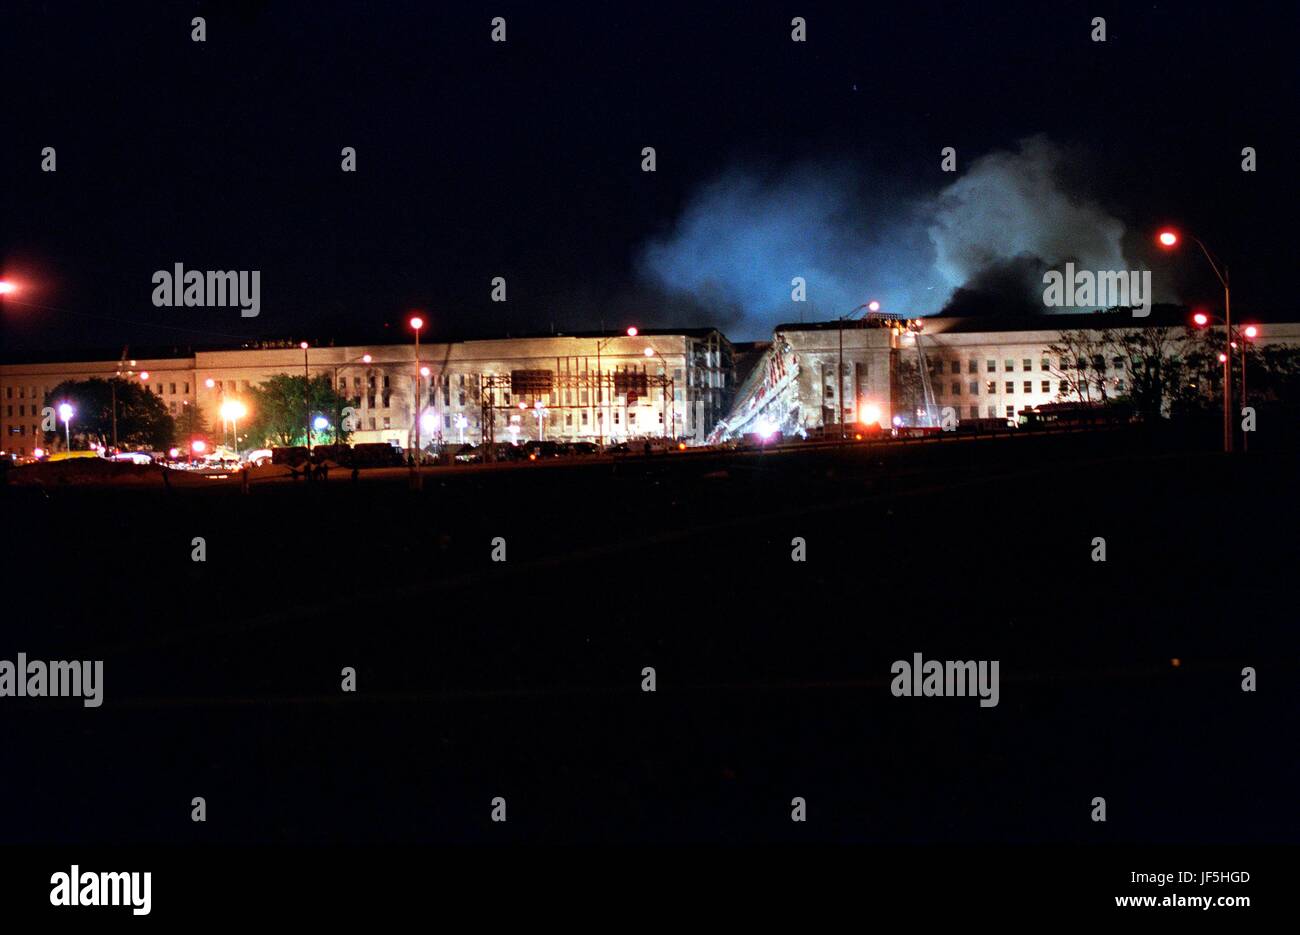 010911-D-2987S-198 Fire fighters battle stubborn fires through the night at the Pentagon on Sept. 11, 2001.  The fire was caused when a hijacked American Airlines flight slammed into the building earlier in the day.  The terrorist attack caused extensive damage to the west face of the building and followed similar attacks on the twin towers of the World Trade Center in New York City.  DoD photo by Helene C. Stikkel. Stock Photo